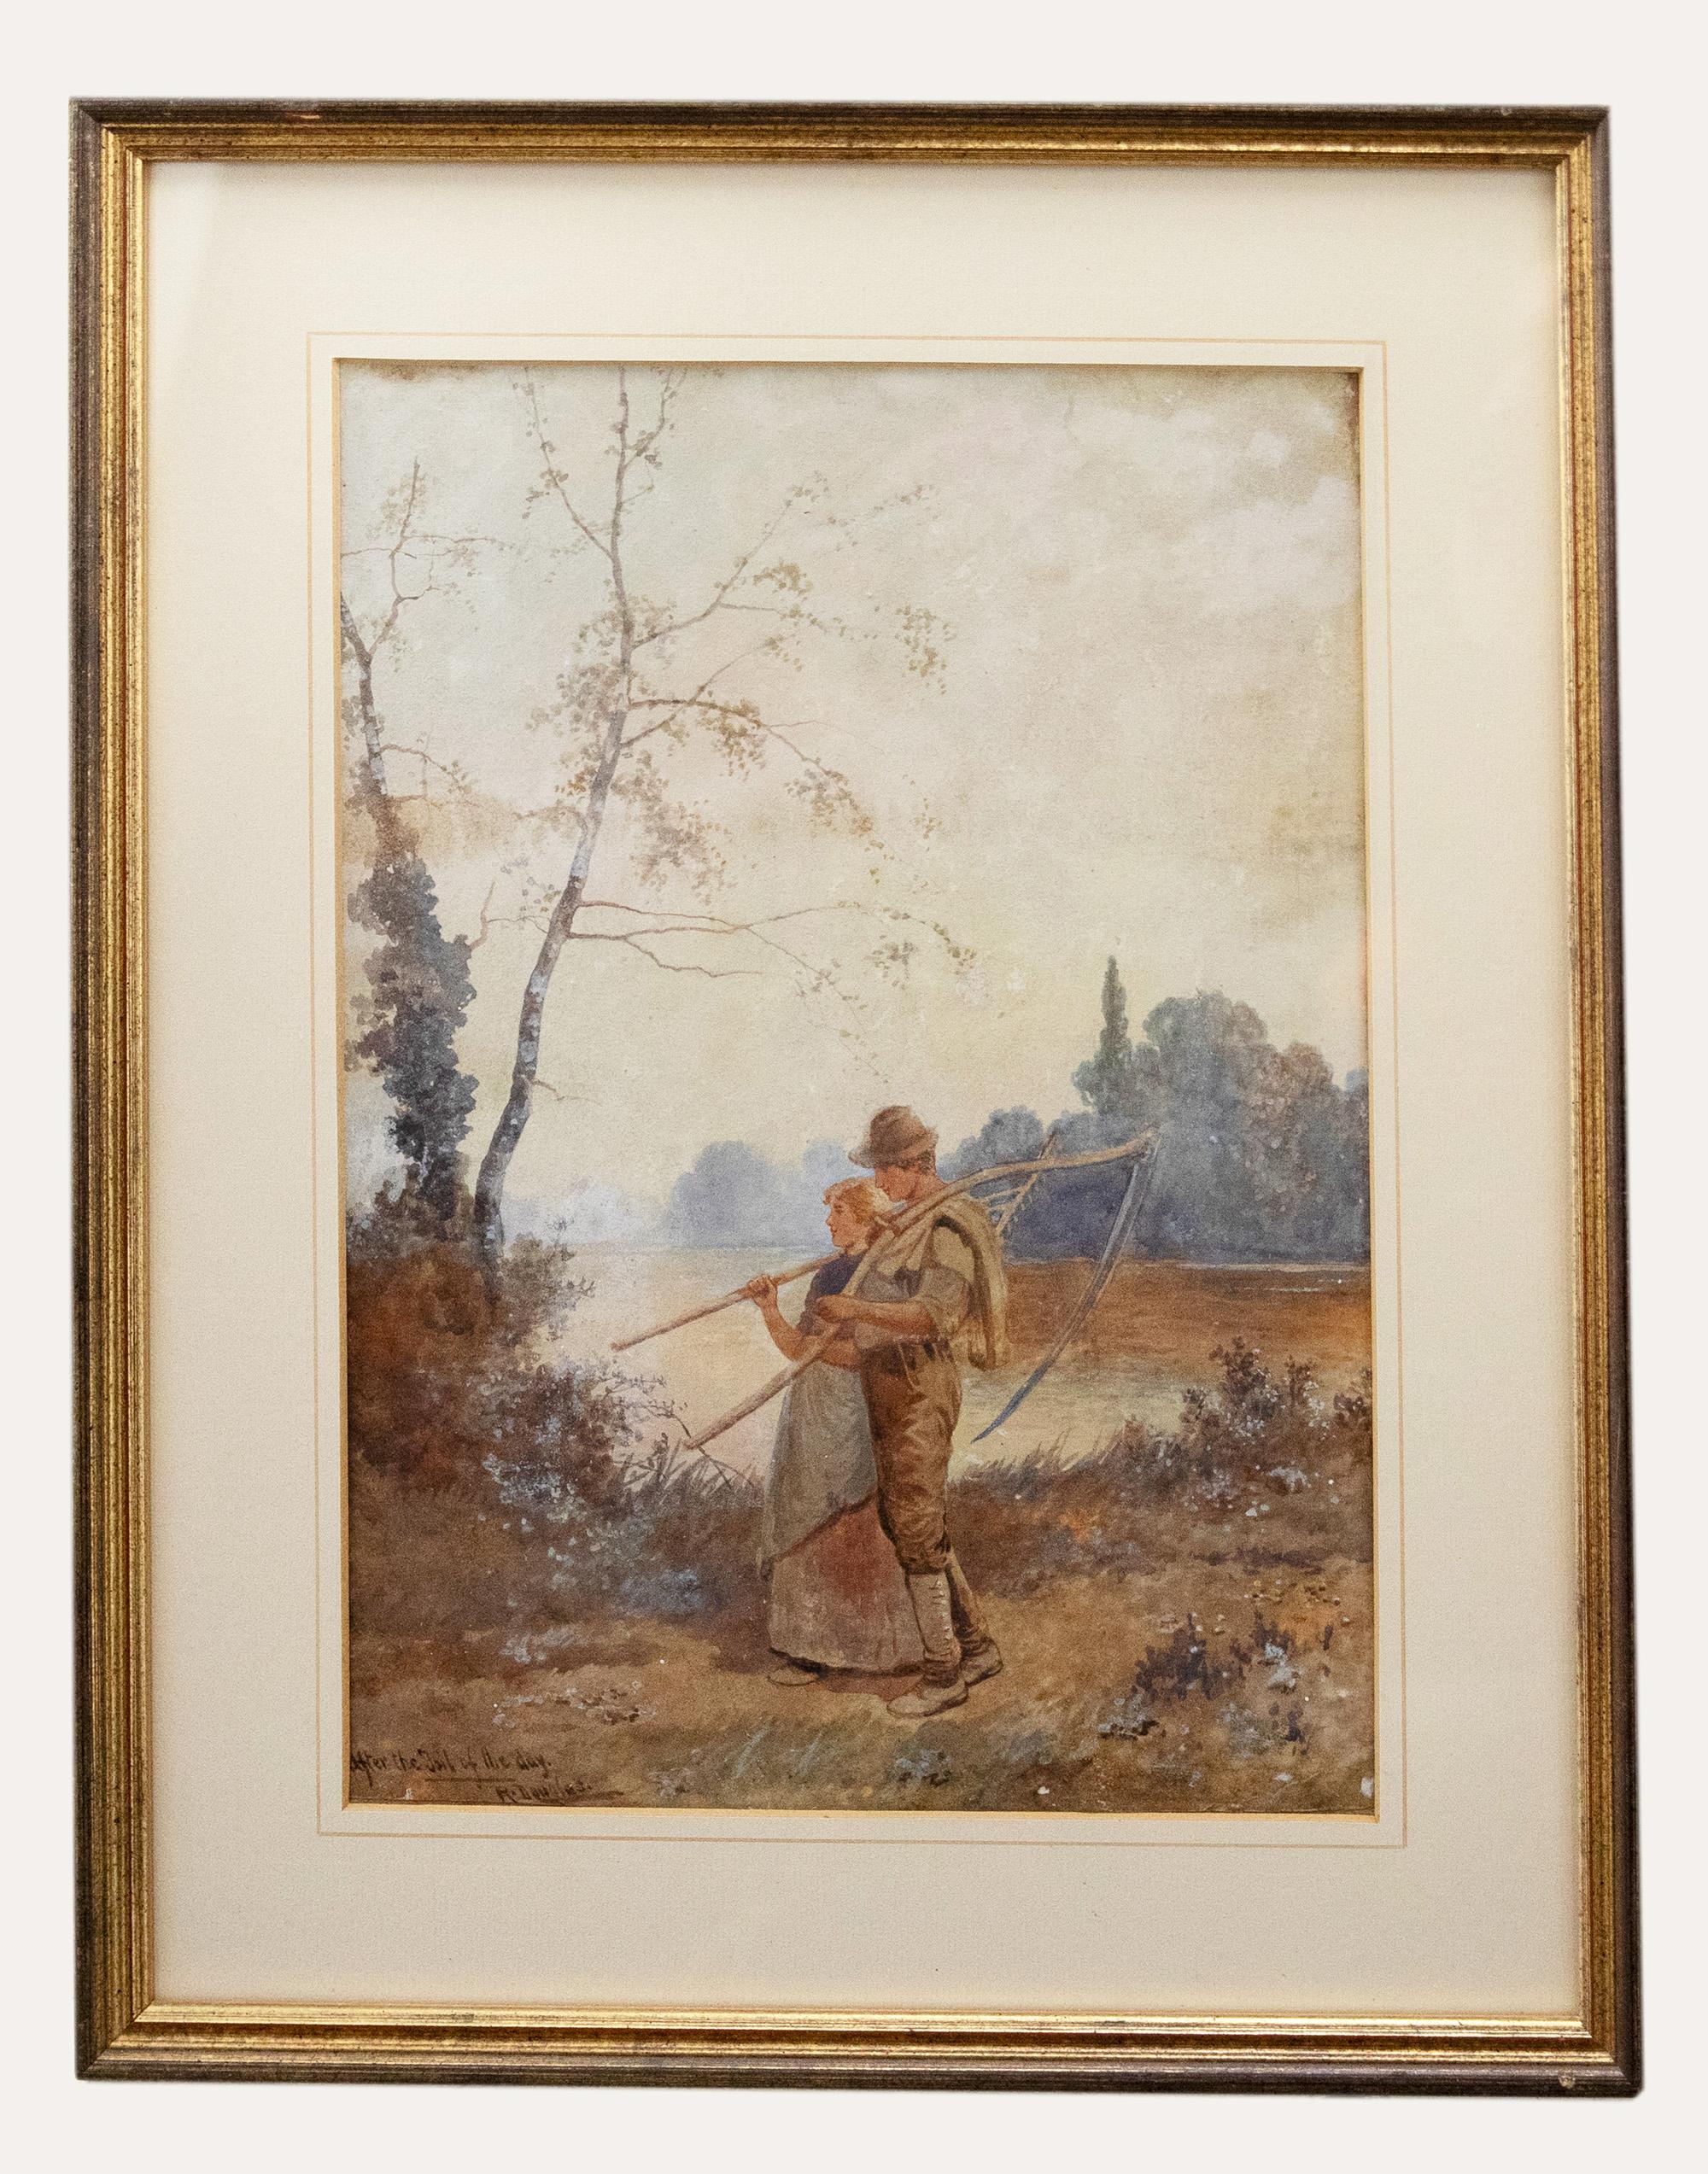 Unknown Figurative Art - Rose Douglas (fl.1893-1898) - Framed Watercolour, After the Toil of the Day